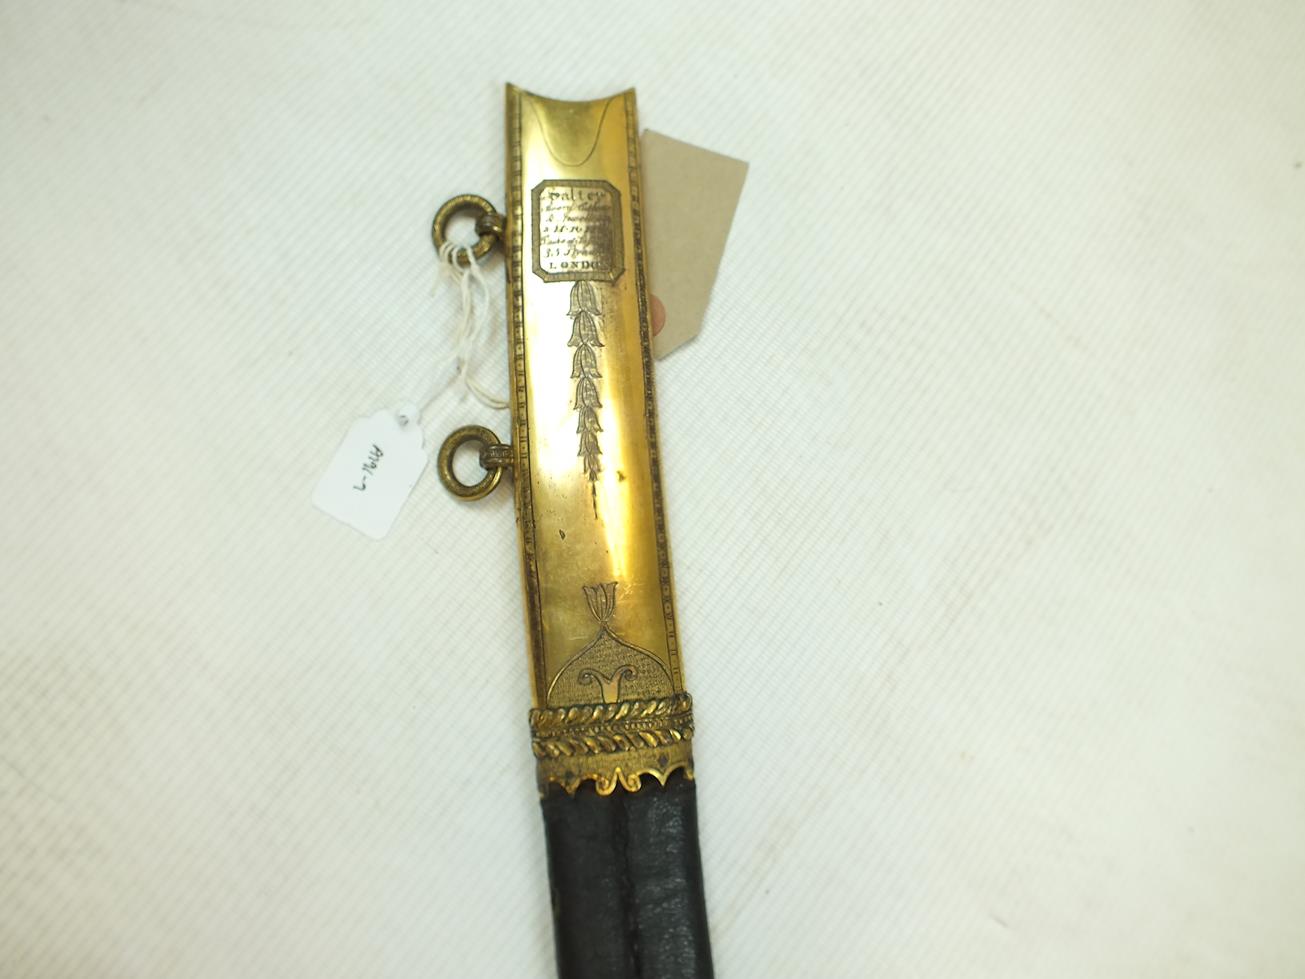 AN HIGHLY UNUSUAL PRESENTATION QUALITY MAMELUKE HILTED DIRK MOUNTED WITH A YATAGHAN BLADE BY SALTER, - Image 25 of 26